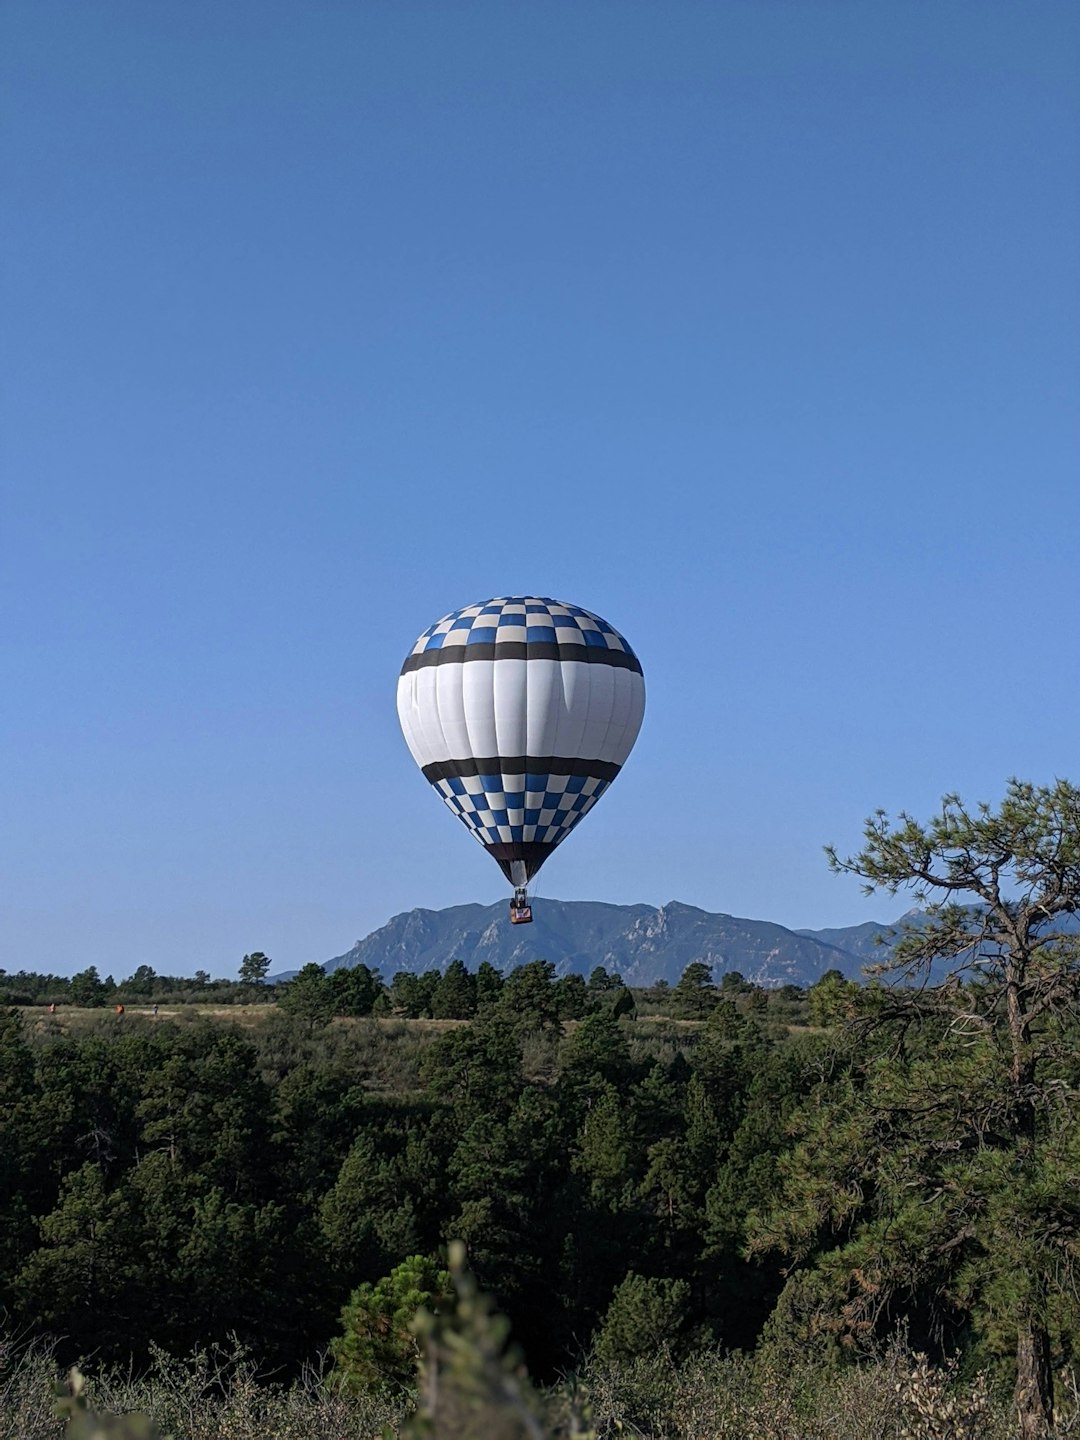 hot air balloon on mid air during daytime